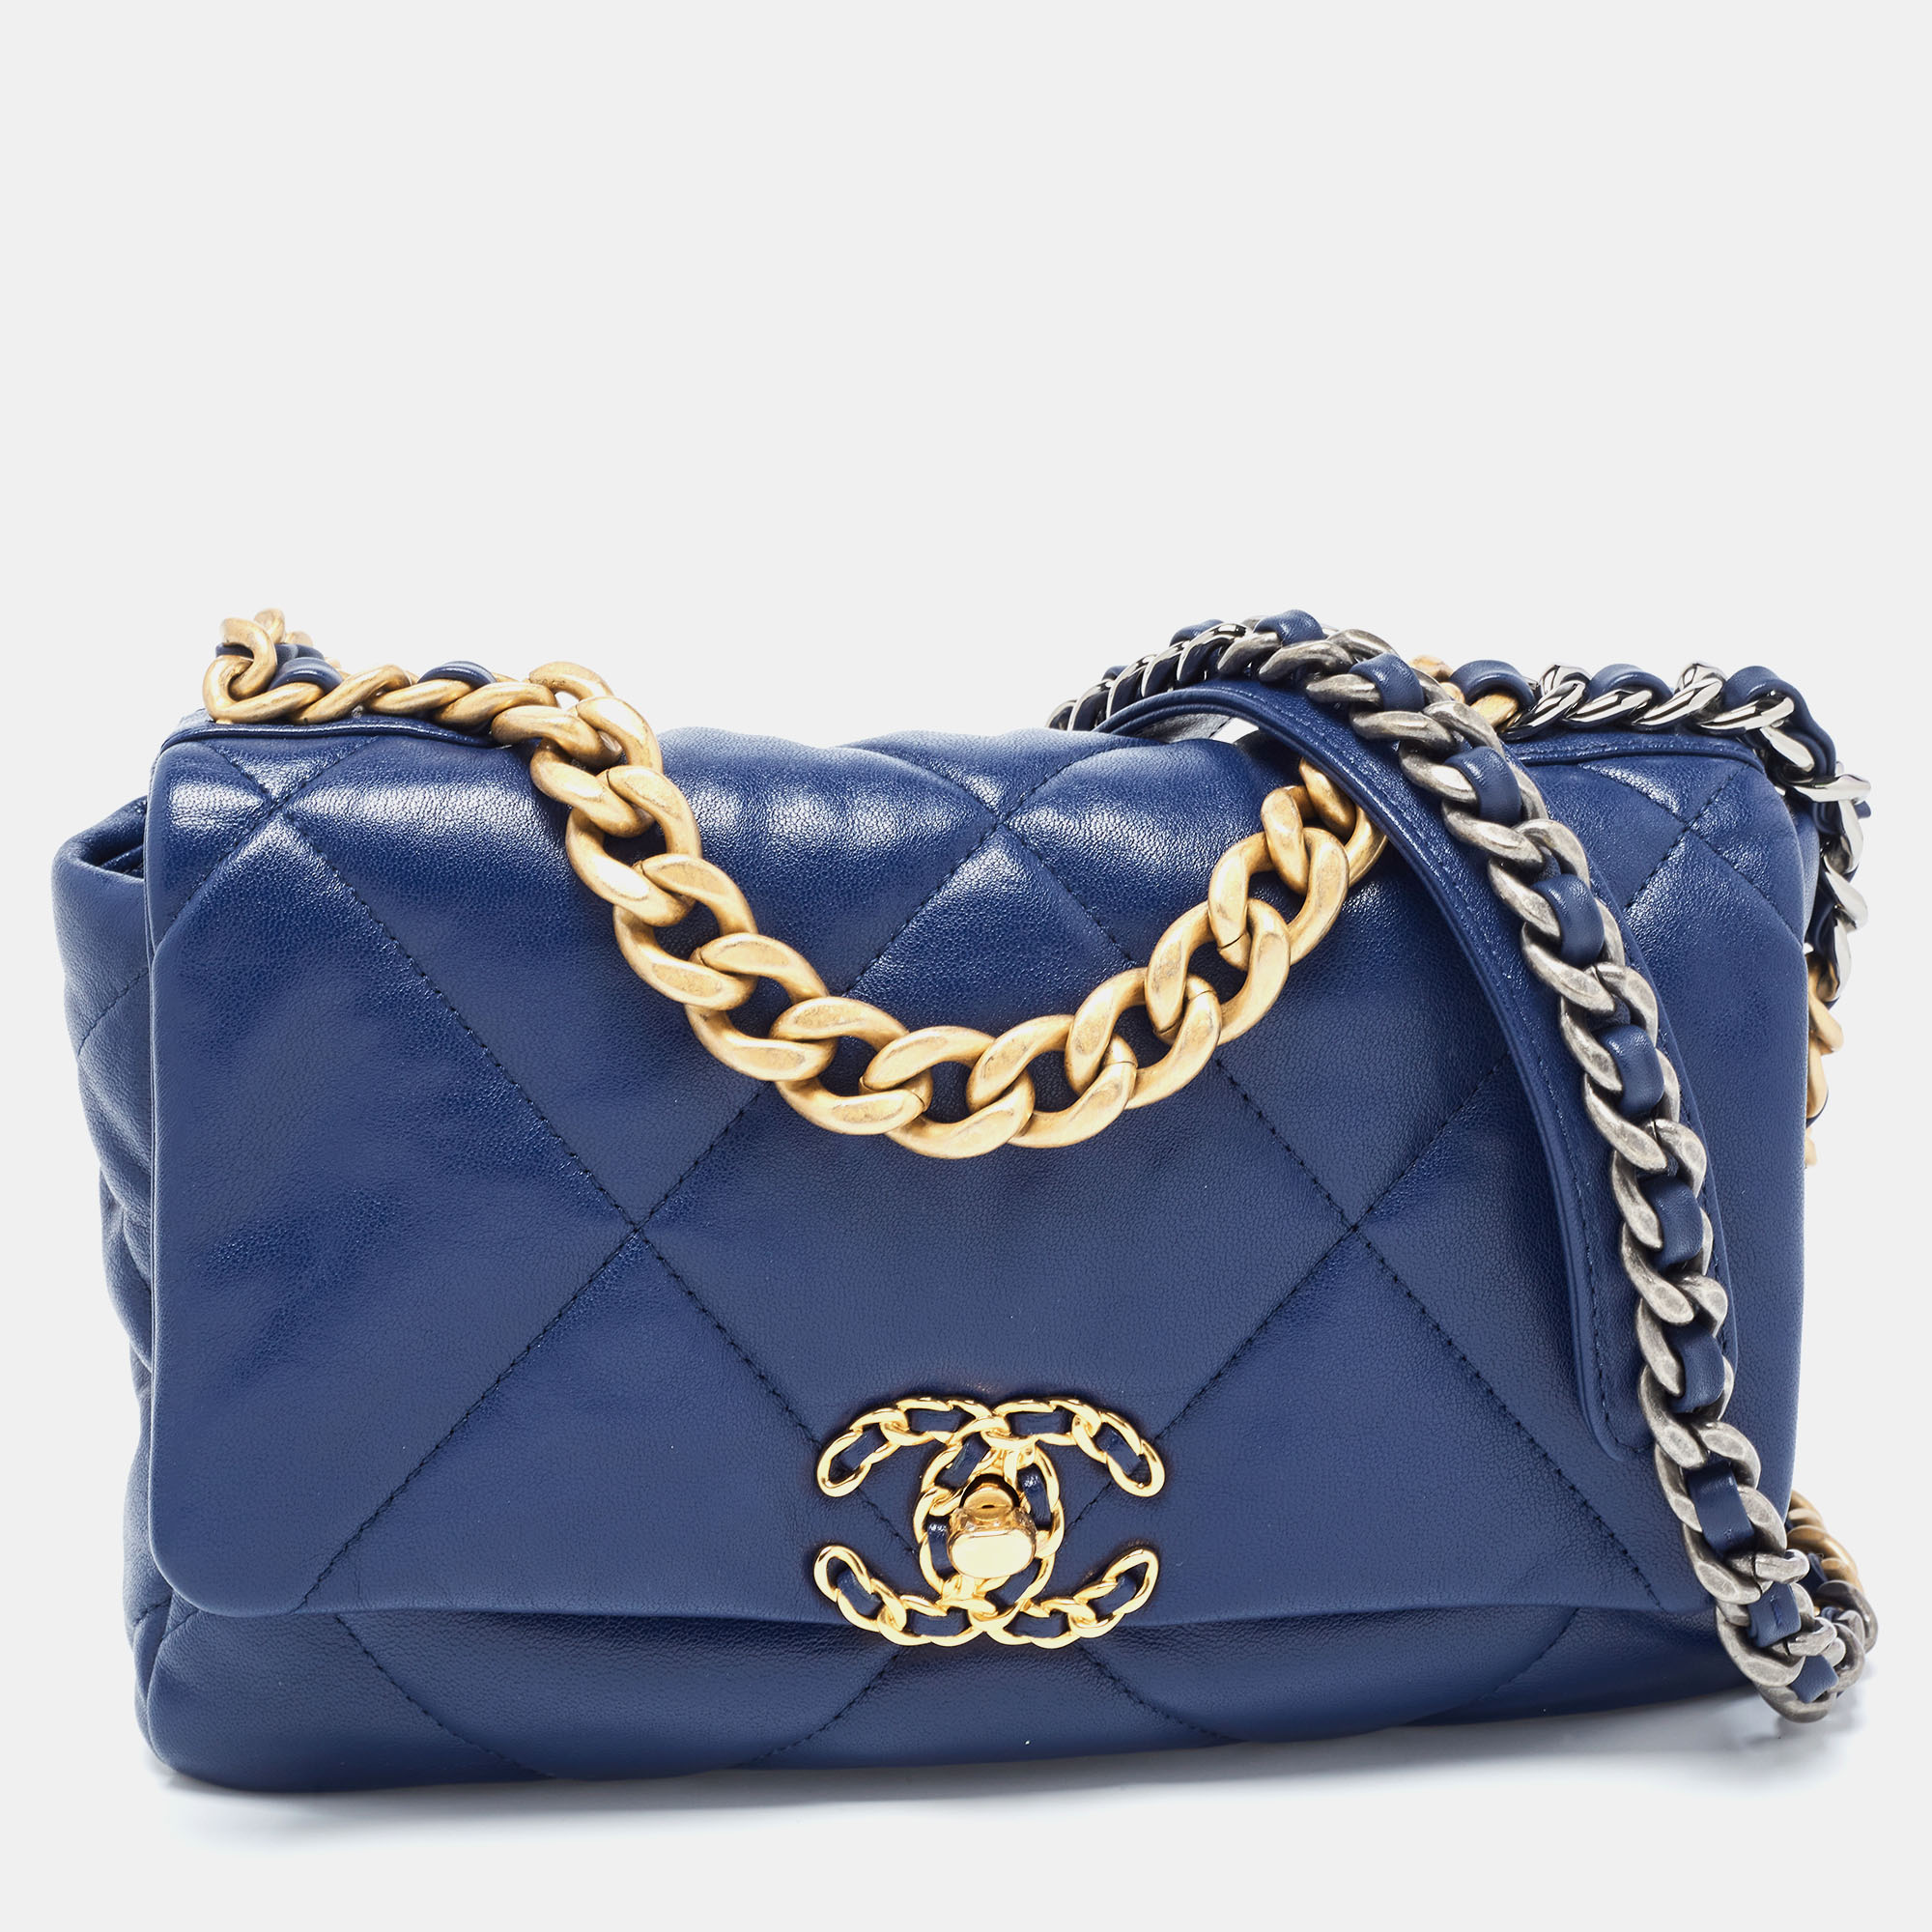 Pre-owned Chanel Blue Quilted Leather Medium 19 Flap Bag